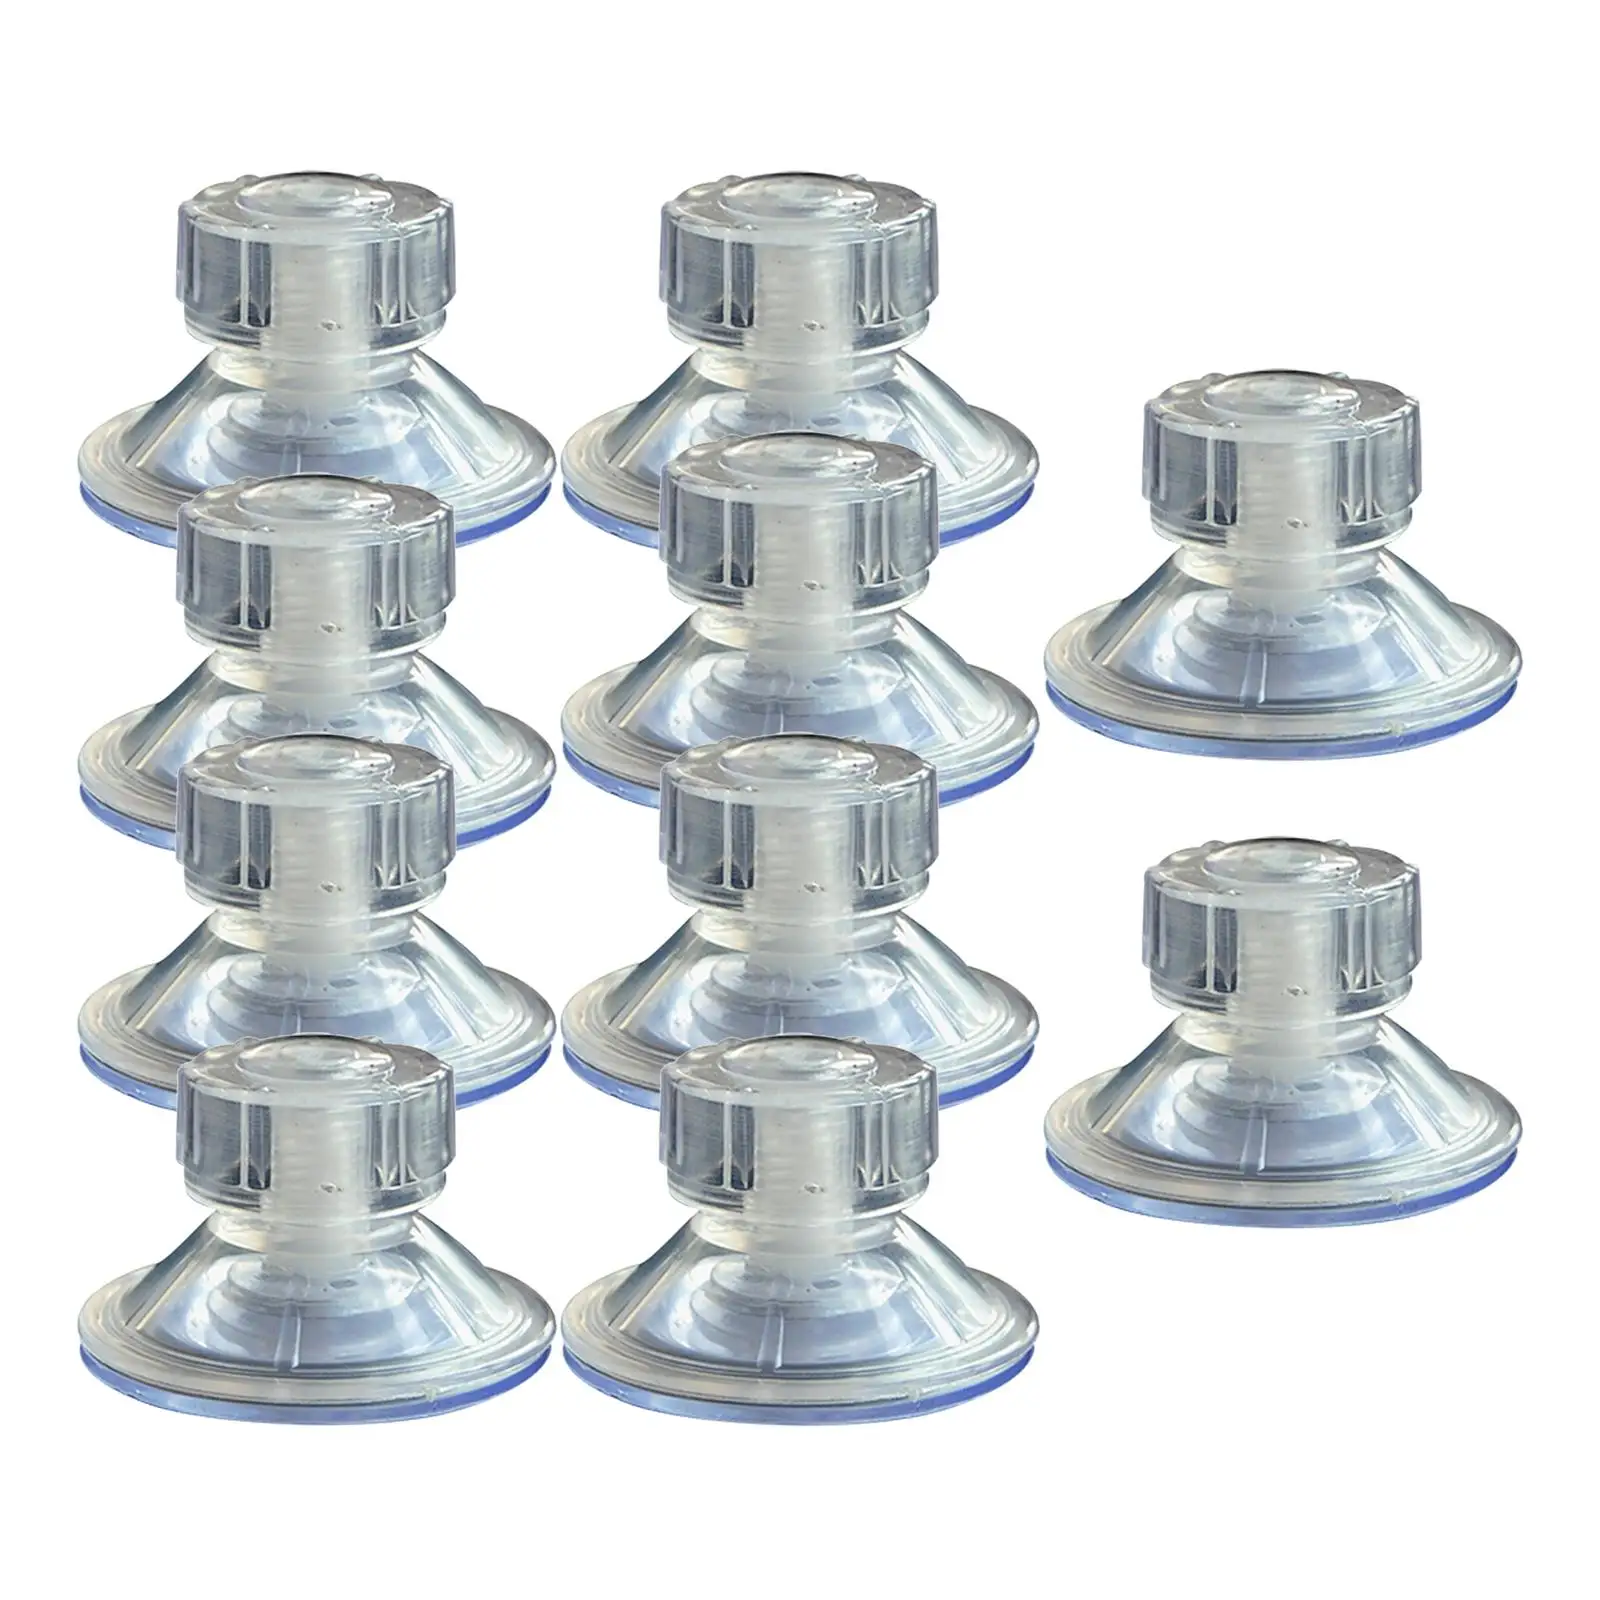 10 Pieces Car Awning Suction Cup Anchor Heavy Duty for  Motorhome